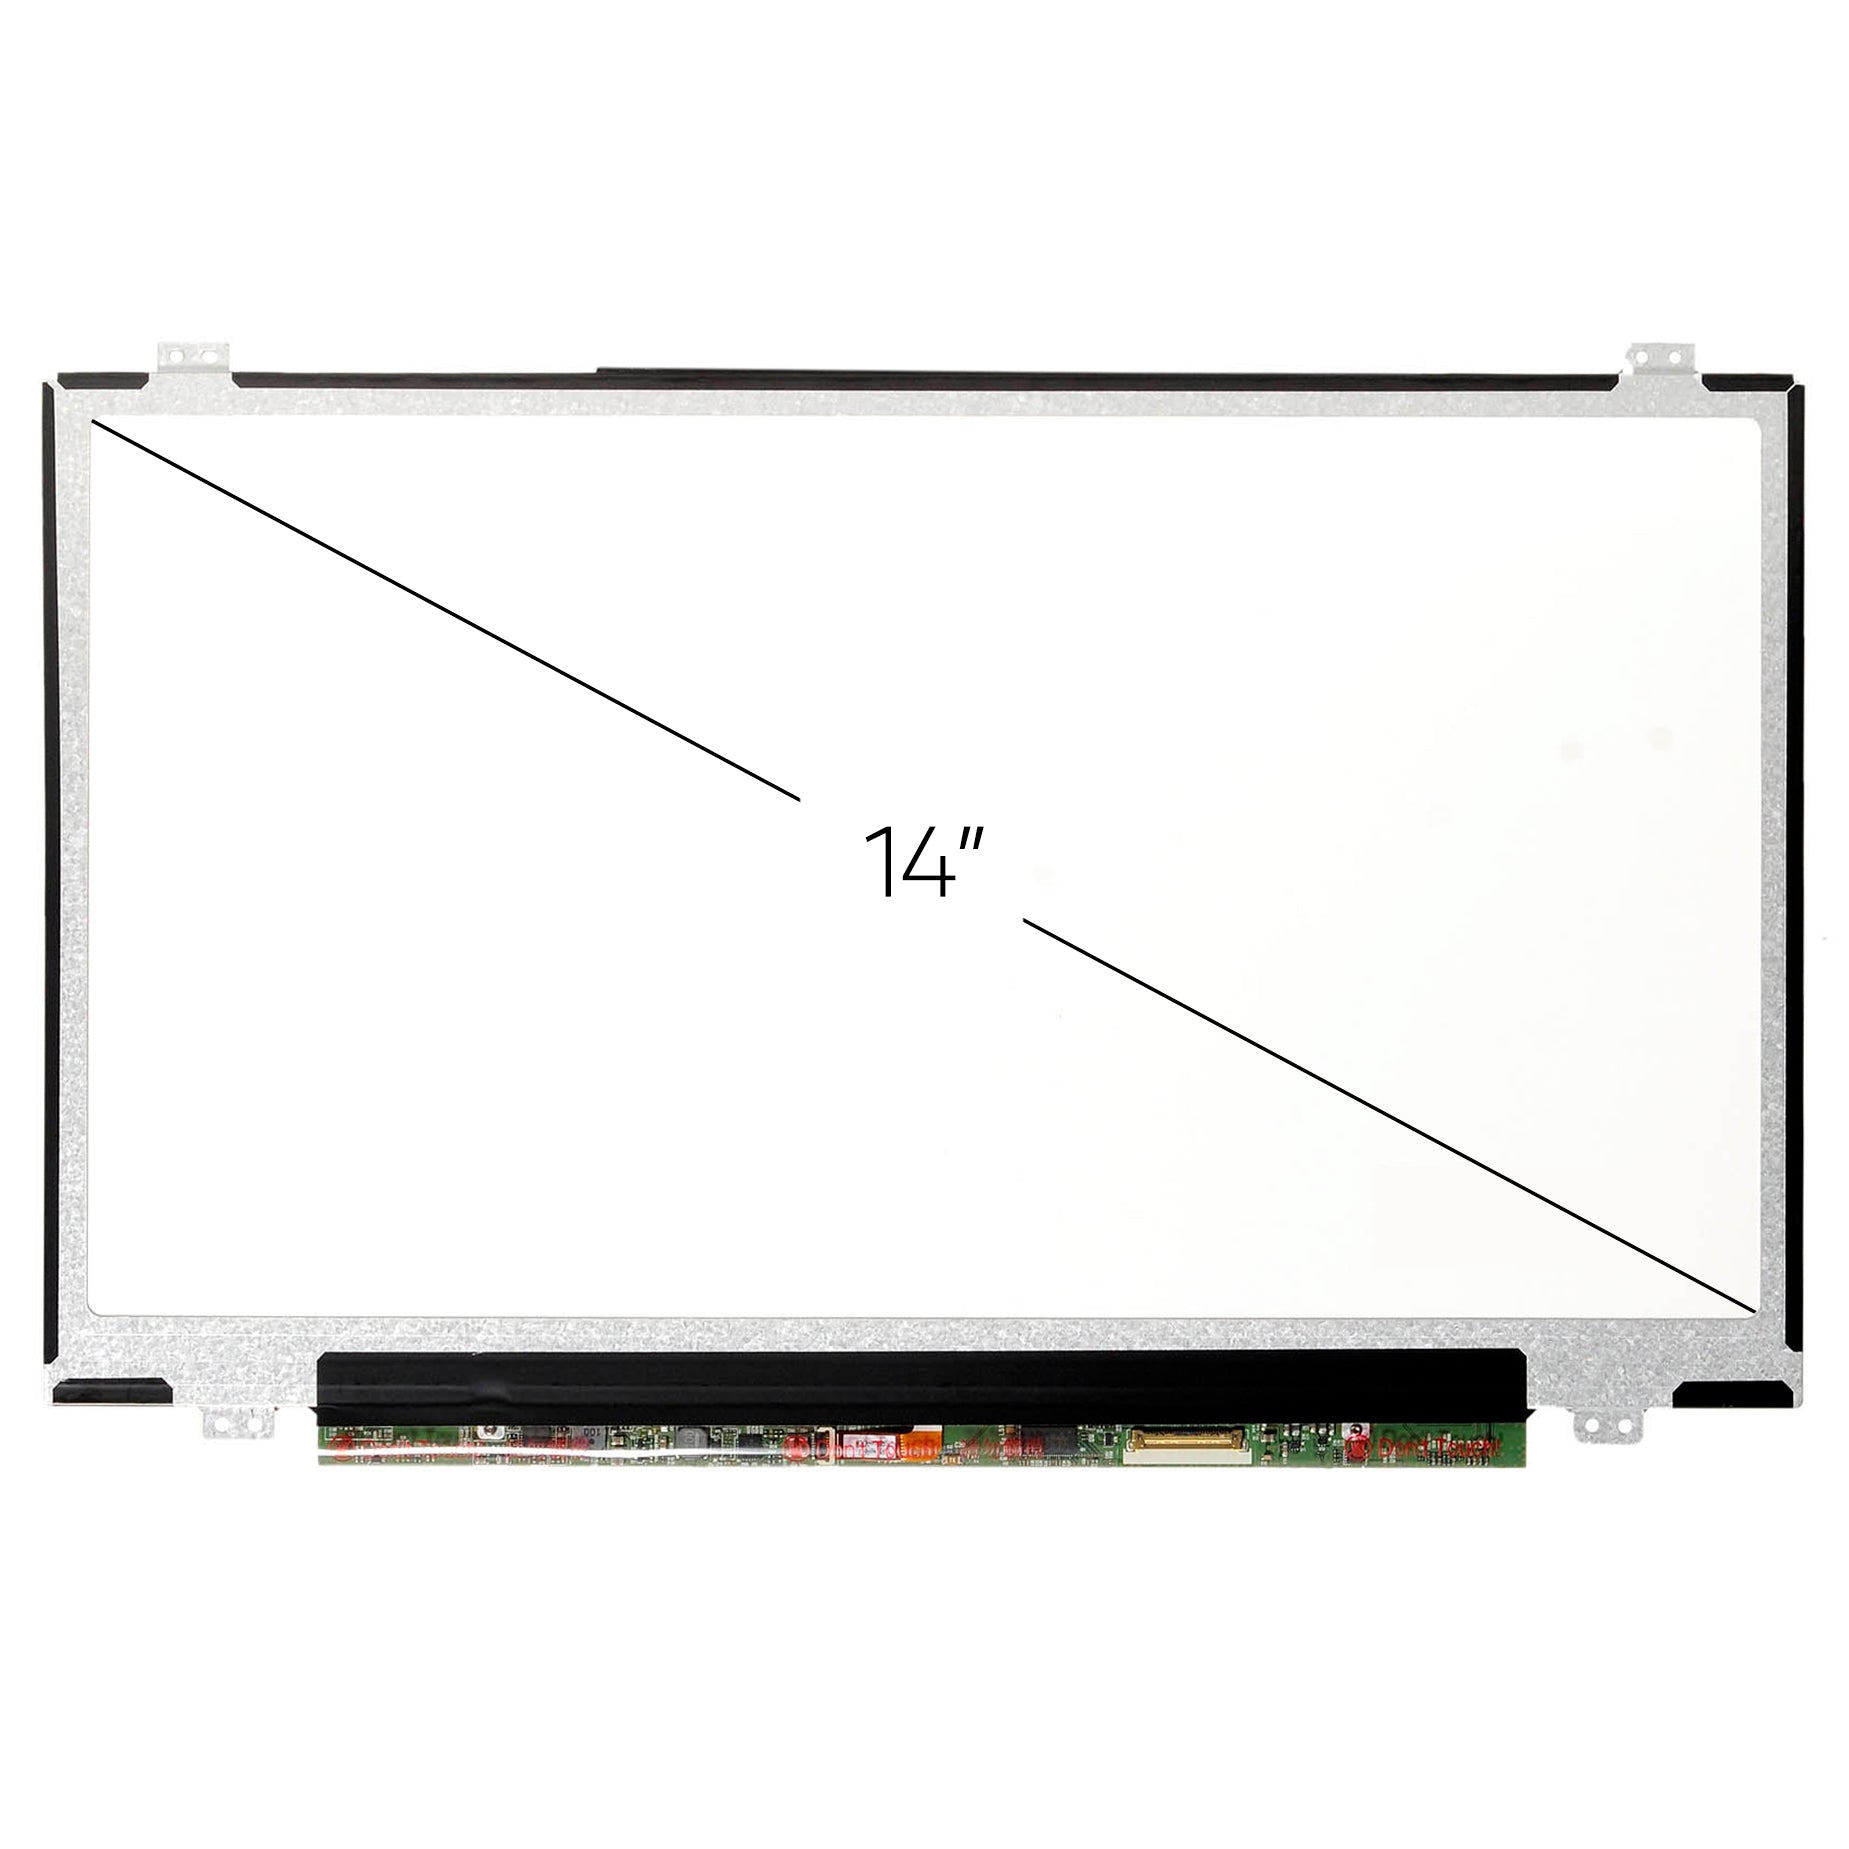 Screen Replacement for LTN140HL02-B01 FHD 1920x1080 IPS Matte LCD LED Display